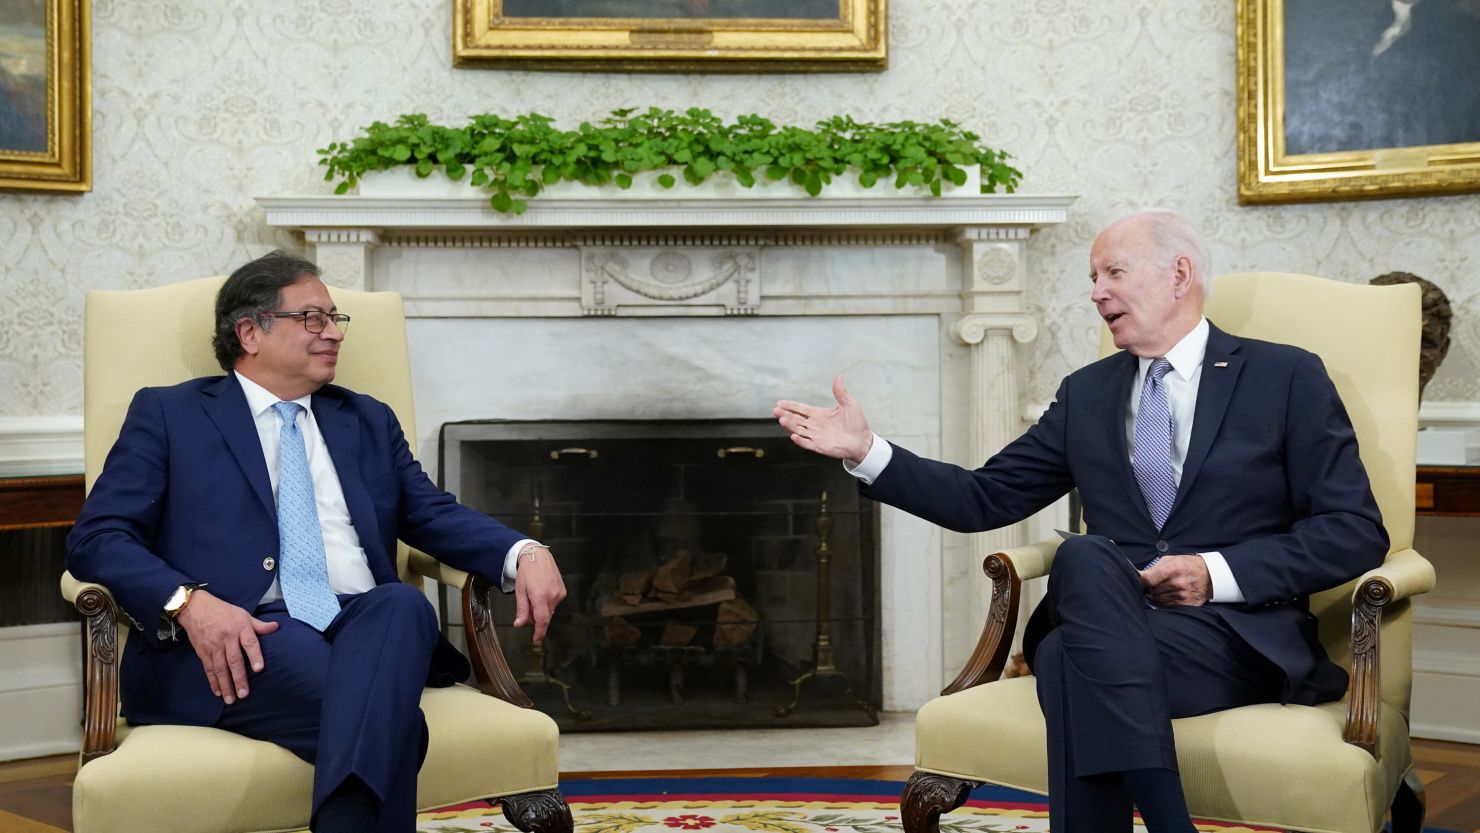 US President Joe Biden meets with Colombian President Gustavo Petro in the White House Oval Office on April 20, 2023.